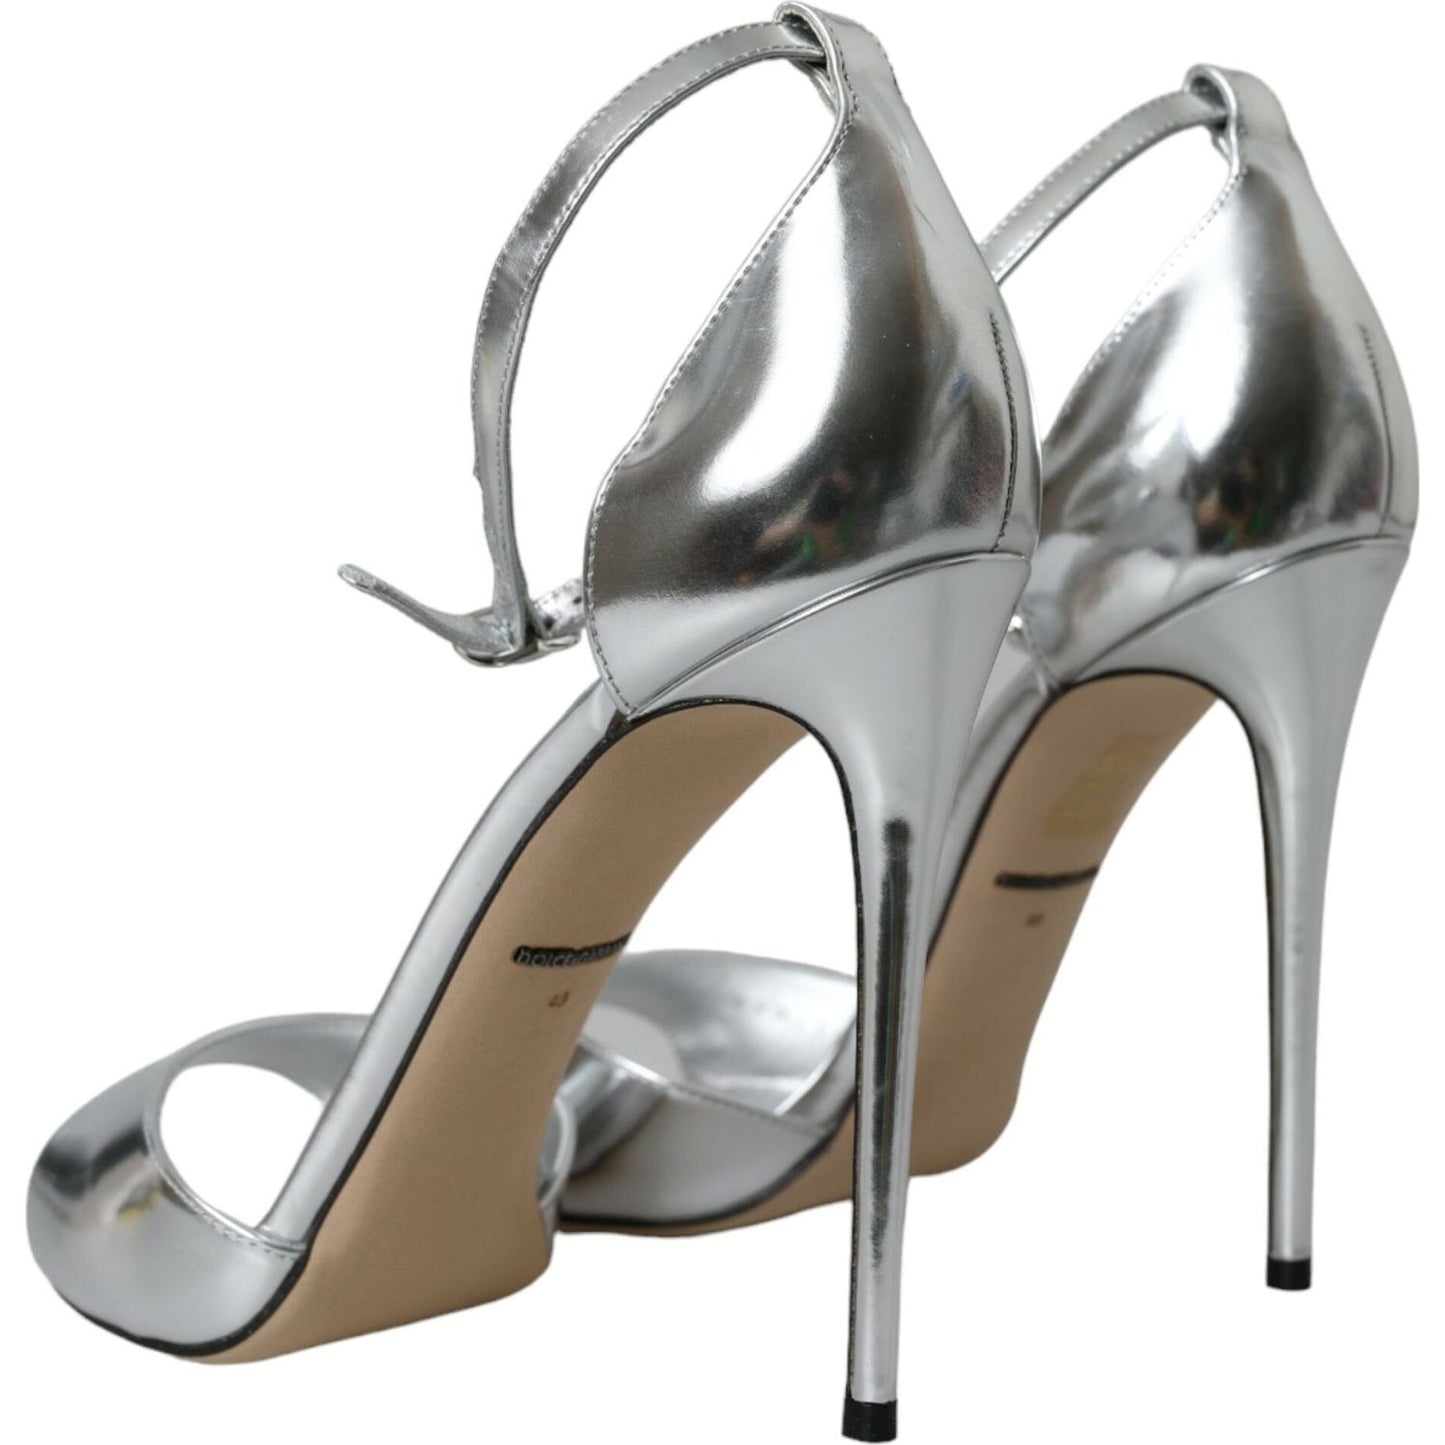 Dolce & Gabbana Silver KEIRA Leather Heels Sandals Shoes silver-keira-leather-heels-sandals-shoes